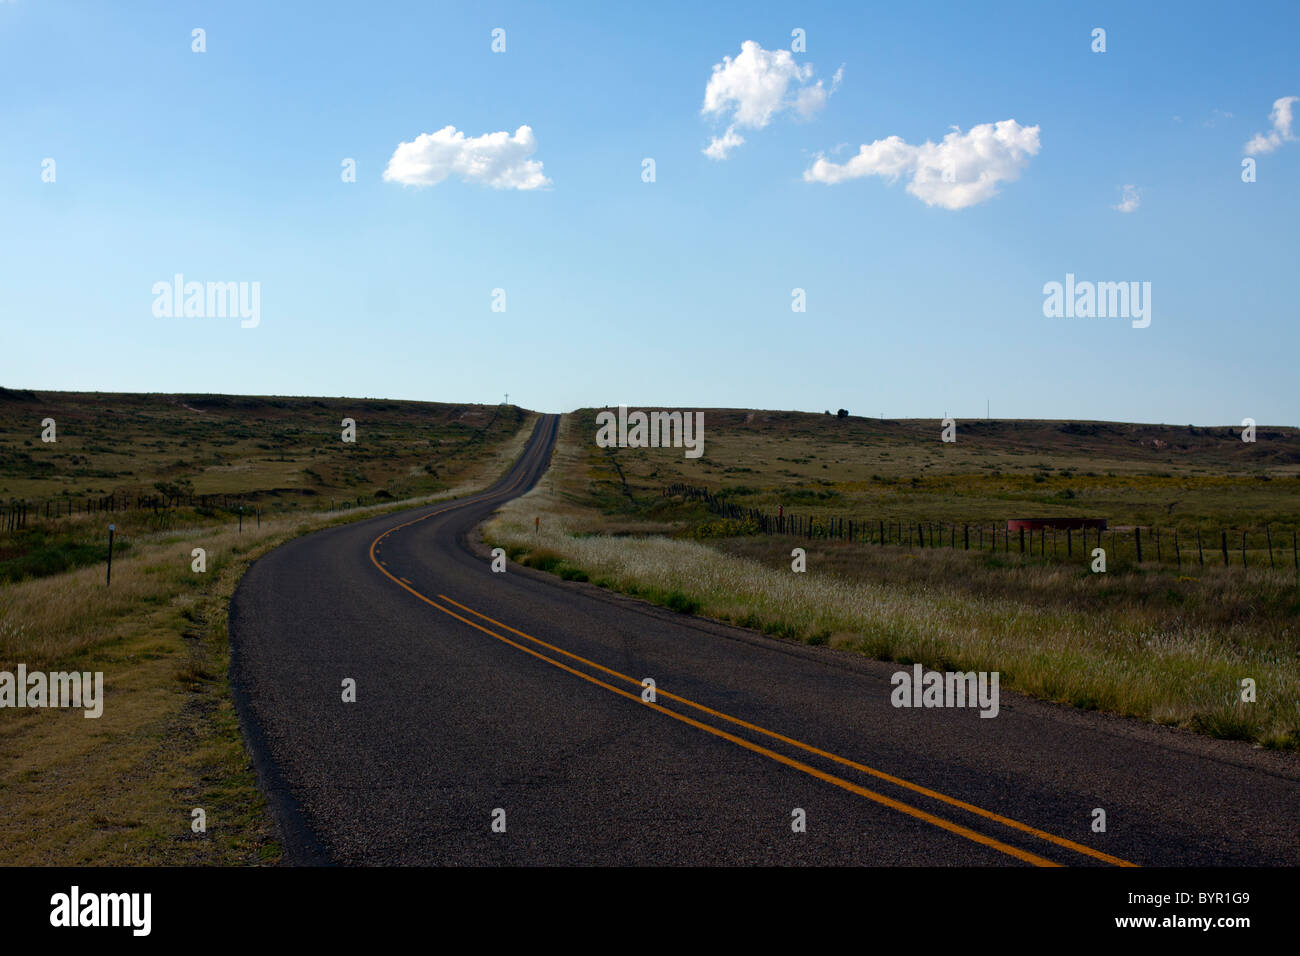 A lonely country highway in the high desert plains of Texas. Stock Photo